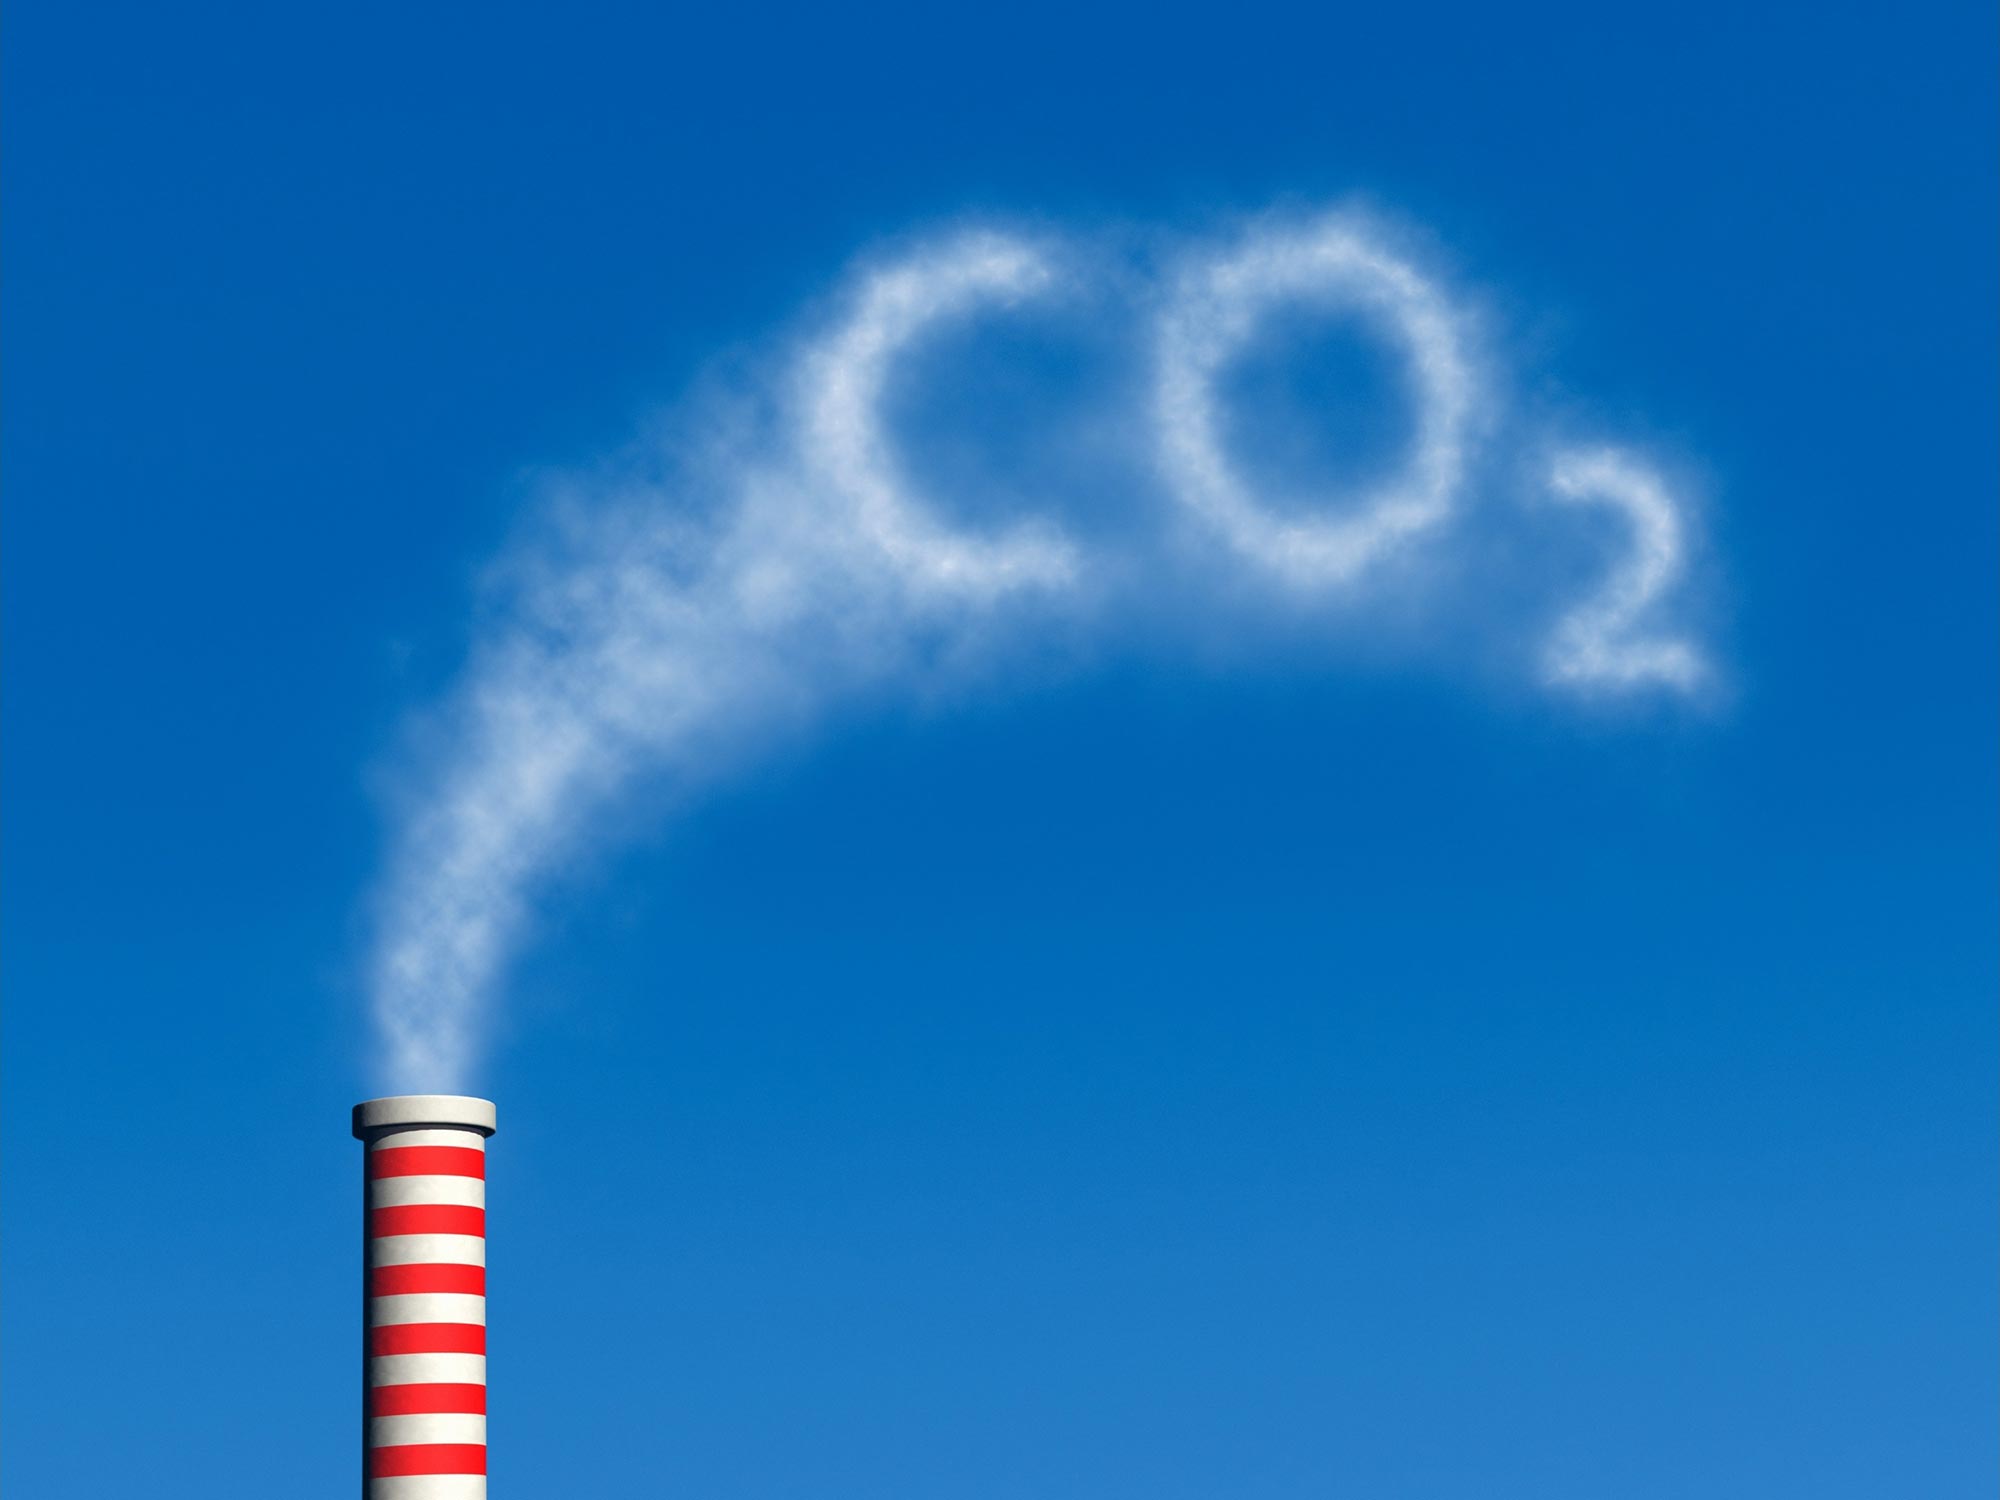 https://scitechdaily.com/images/CO2-Carbon-Dioxide-Power-Plant-Smokestack-Illustration.jpg